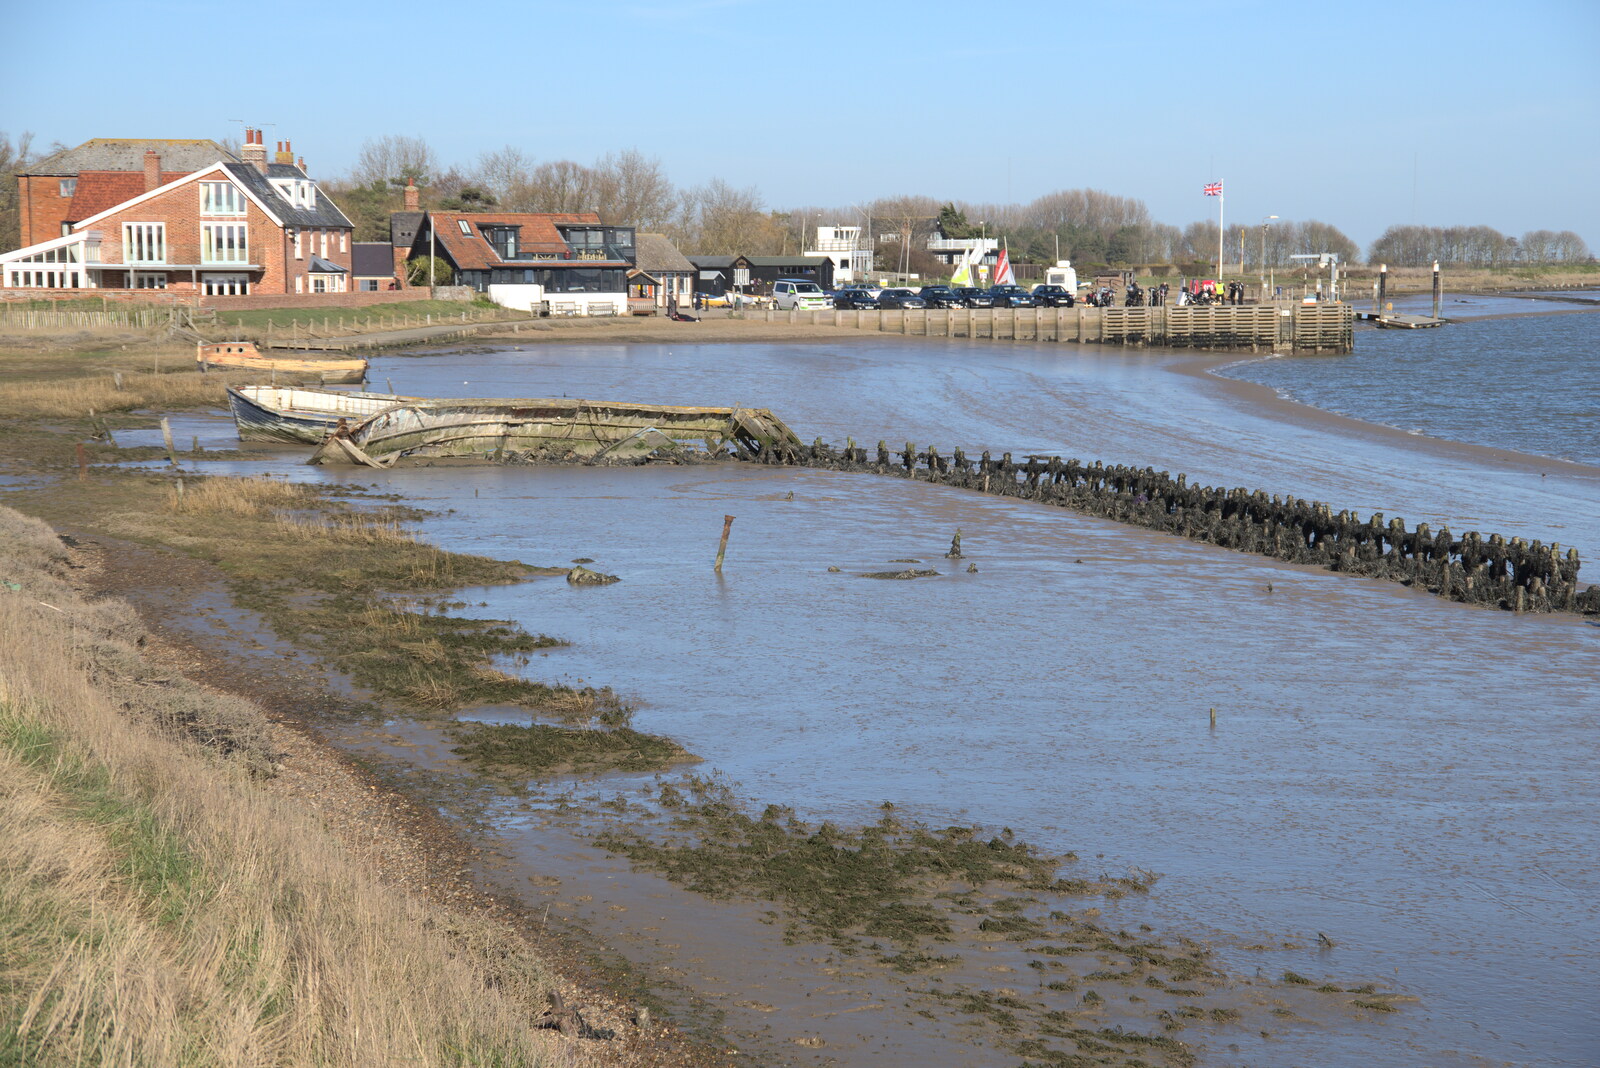 Looking back at Orford Quay from A Trip to Orford Castle, Orford, Suffolk - 26th February 2022